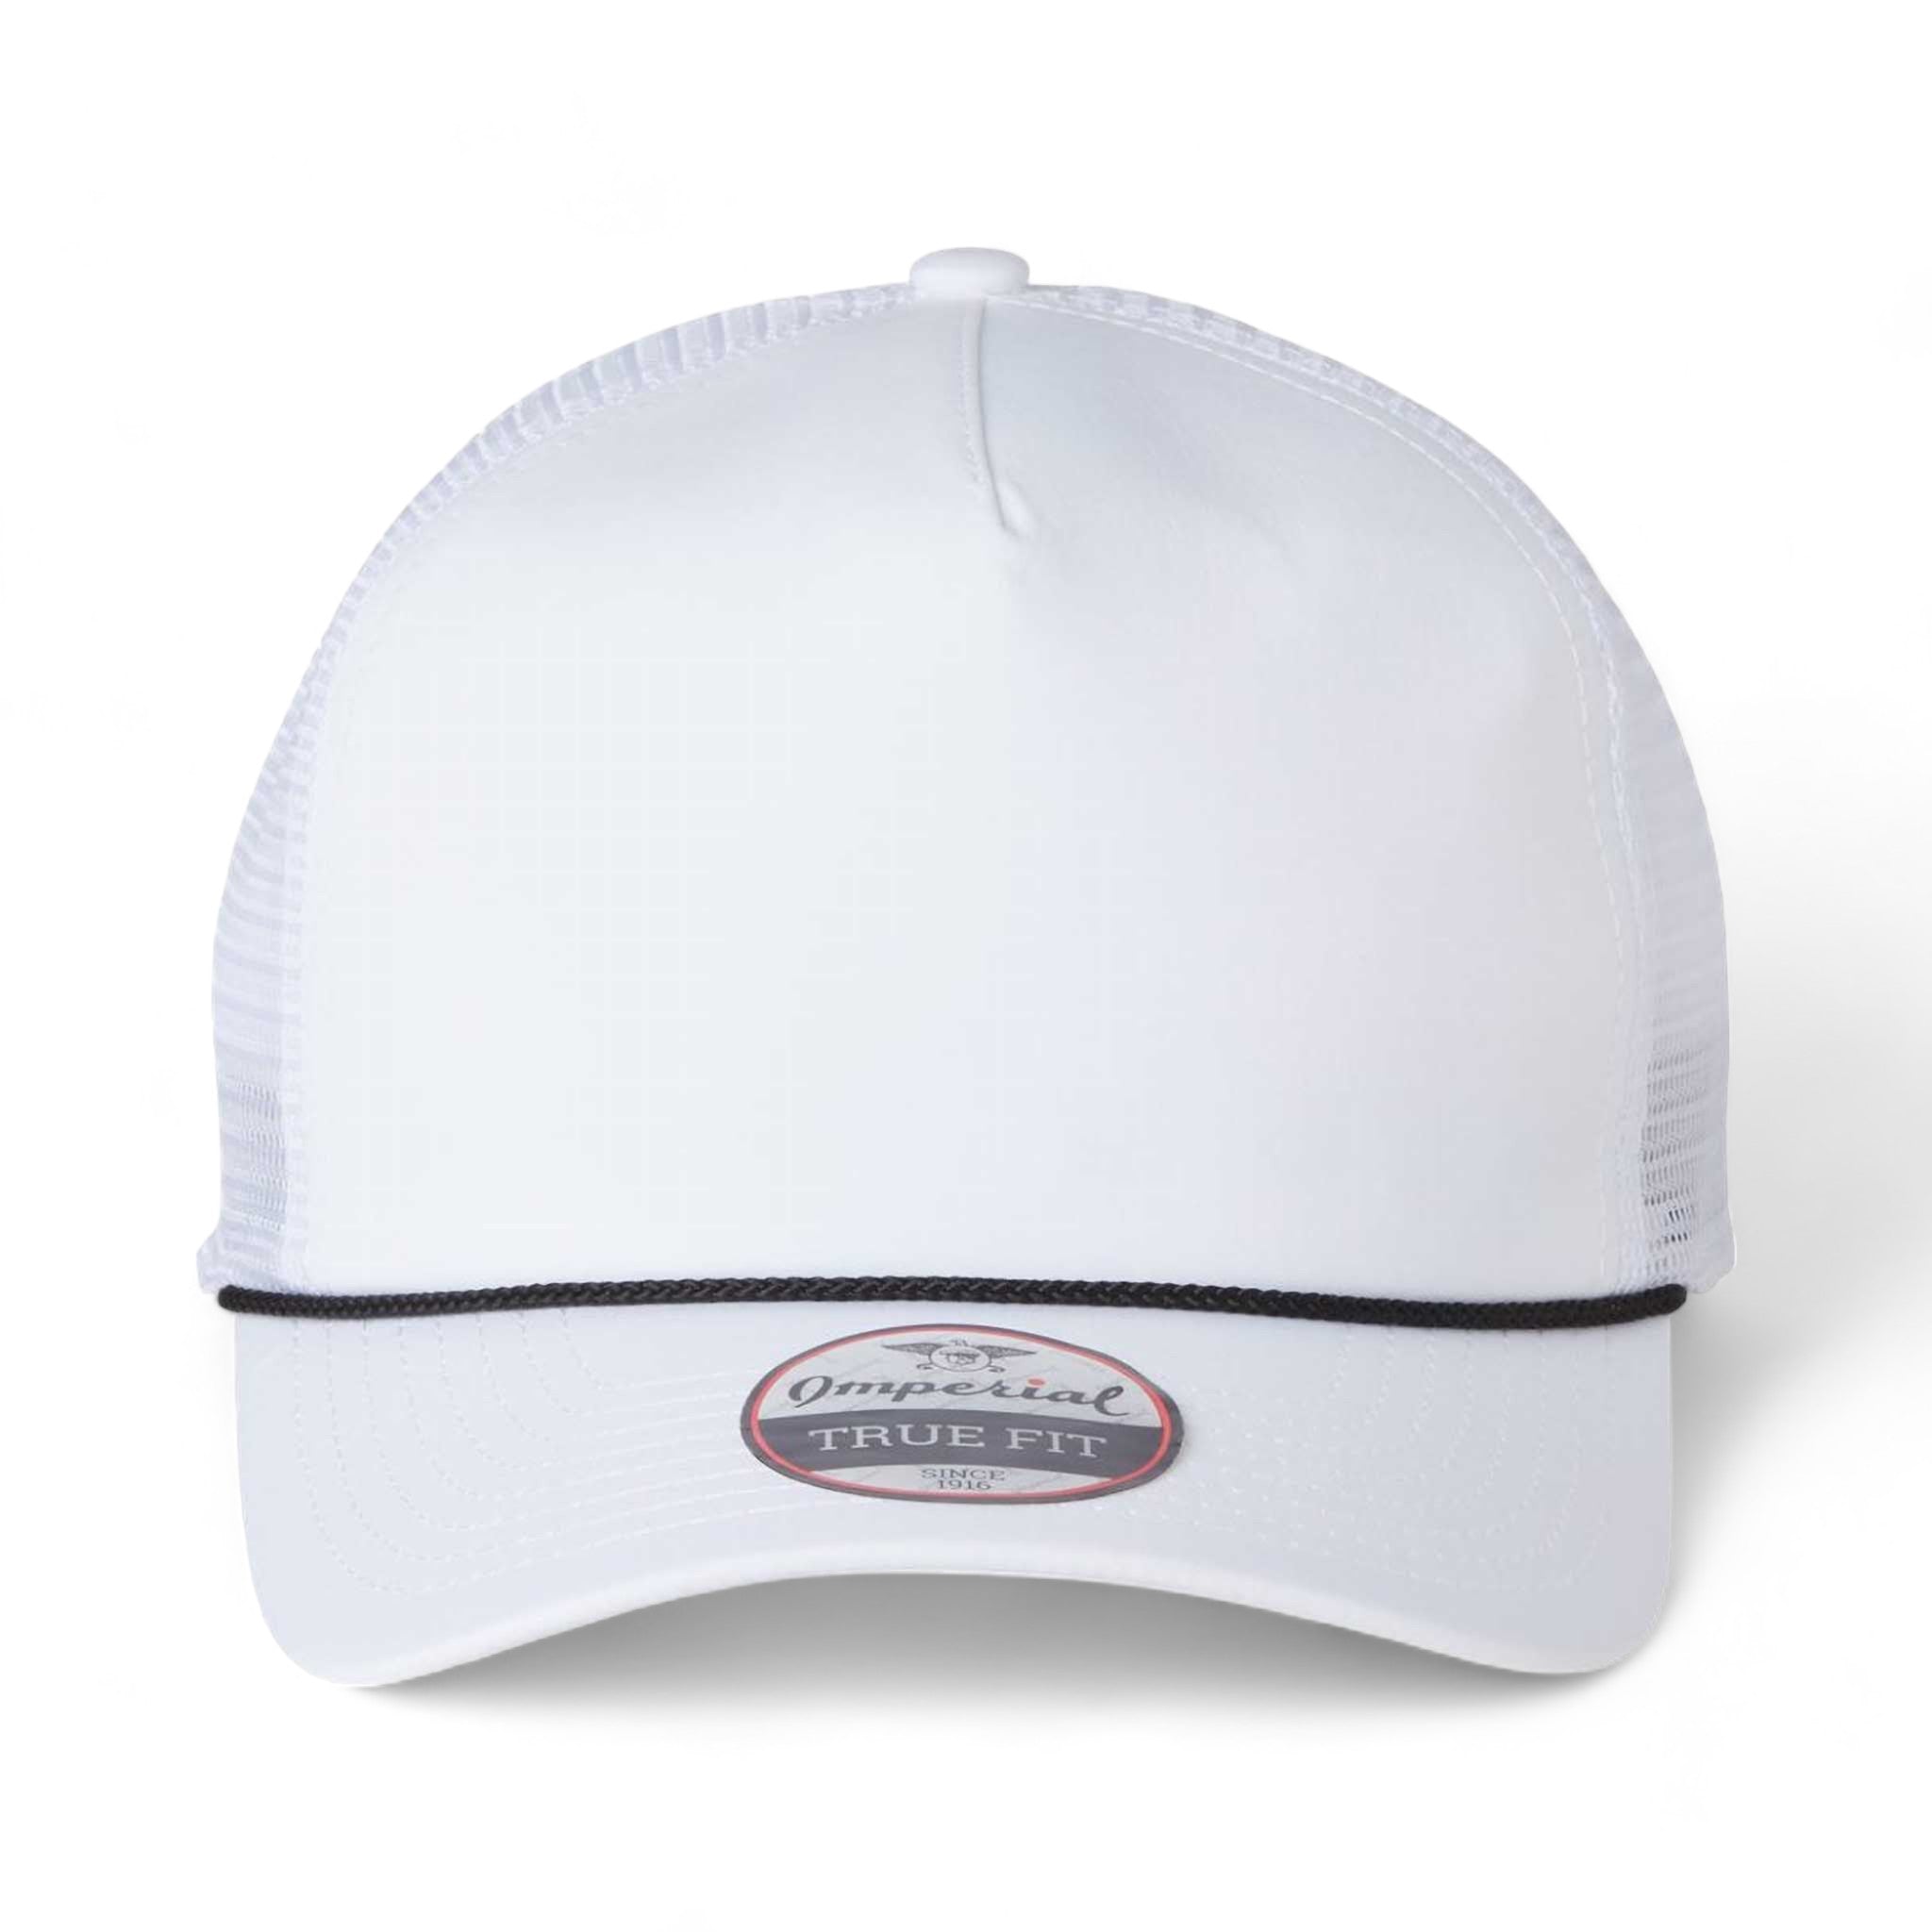 Front view of Imperial 5055 custom hat in white, white and black